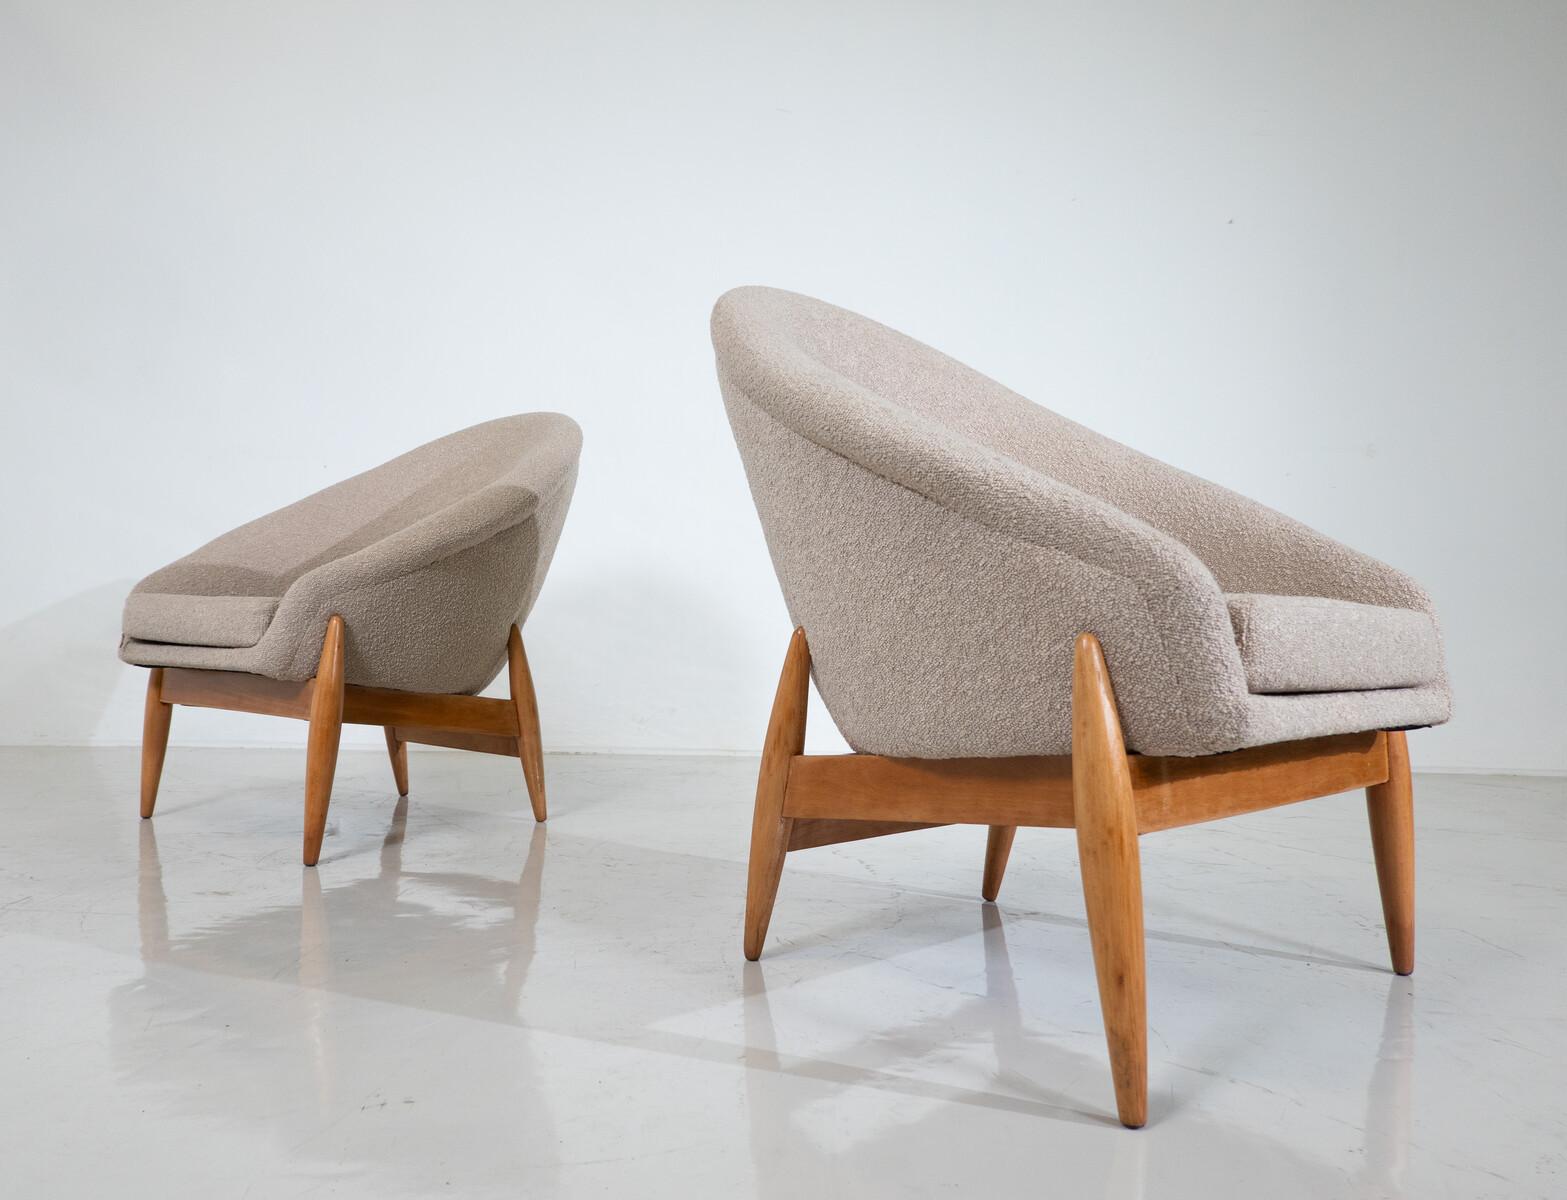 Pair of Mid-Century Modern Beige Fabric Armchairs by Julia Gaubek - Hungary 1950 For Sale 4